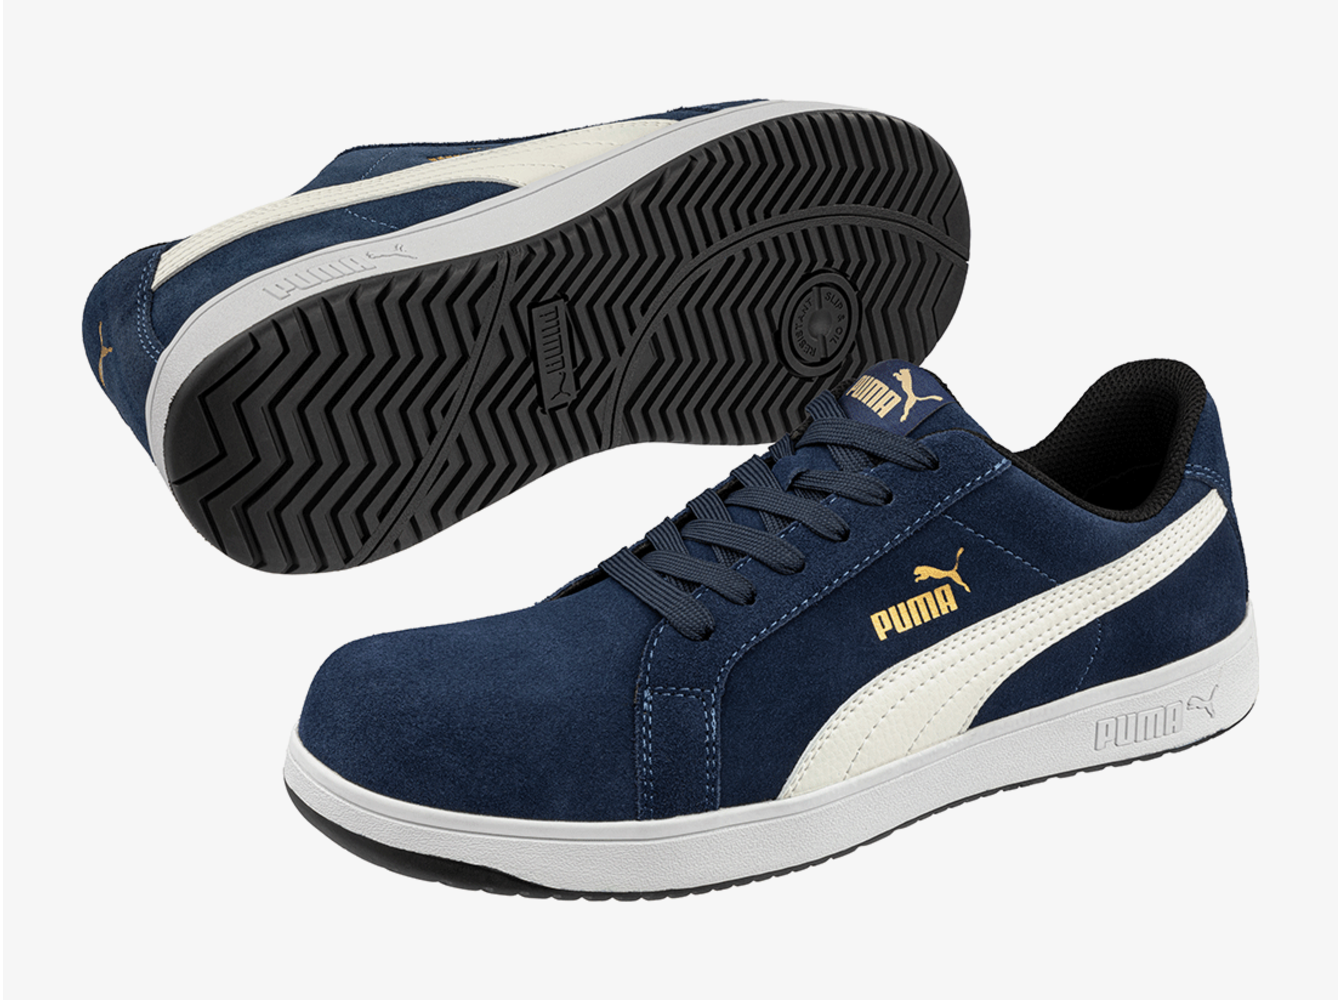 Puma 64.002.0 Iconic Suede Navy Low S1PL